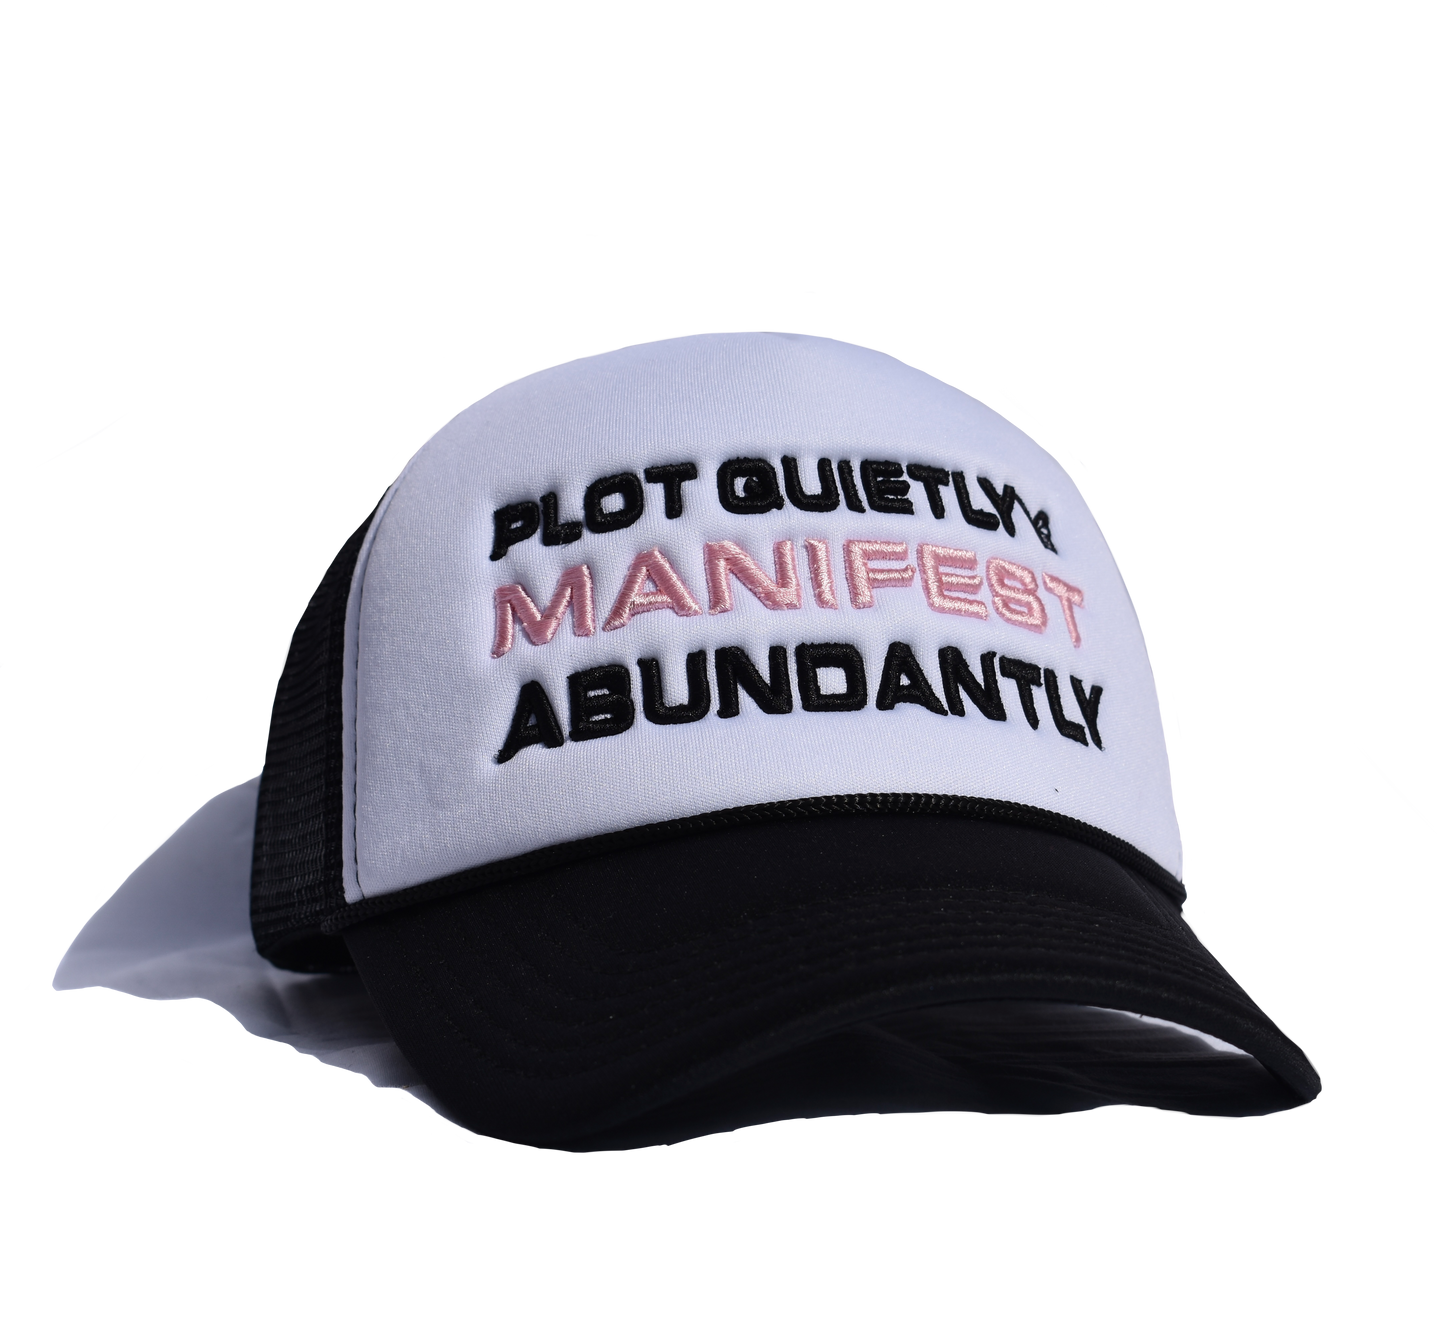 PLOT QUIETY BLACK PUFF EMBROIDERED HAT